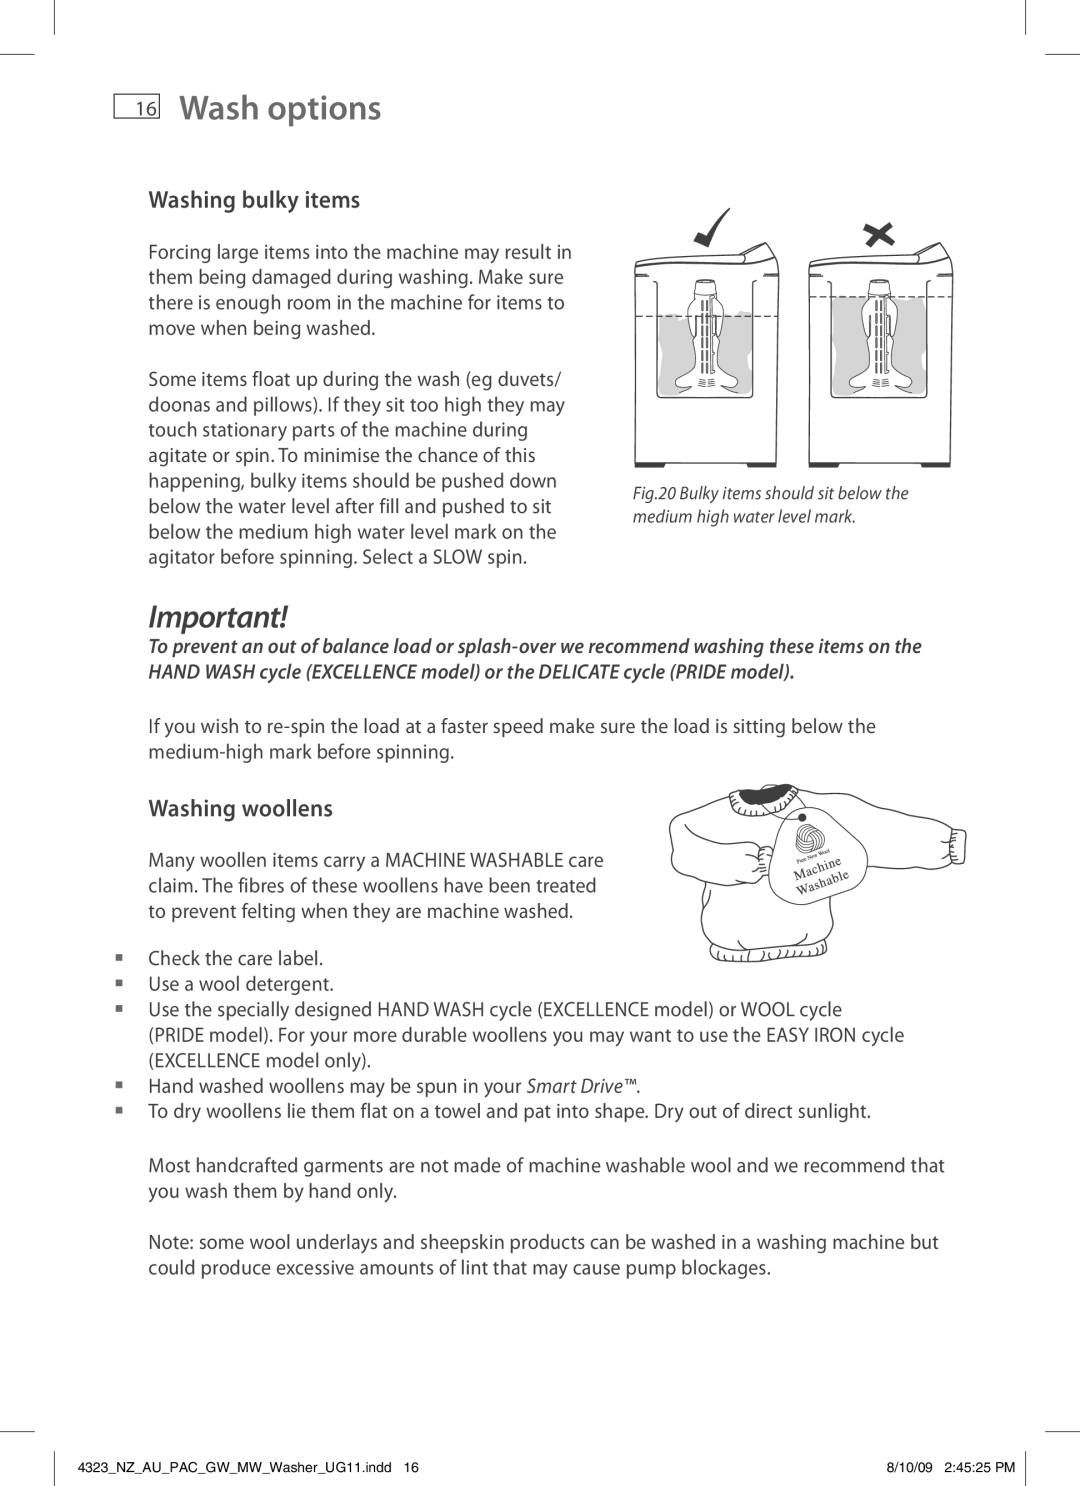 Fisher & Paykel 4323 installation instructions Washing bulky items, Washing woollens 